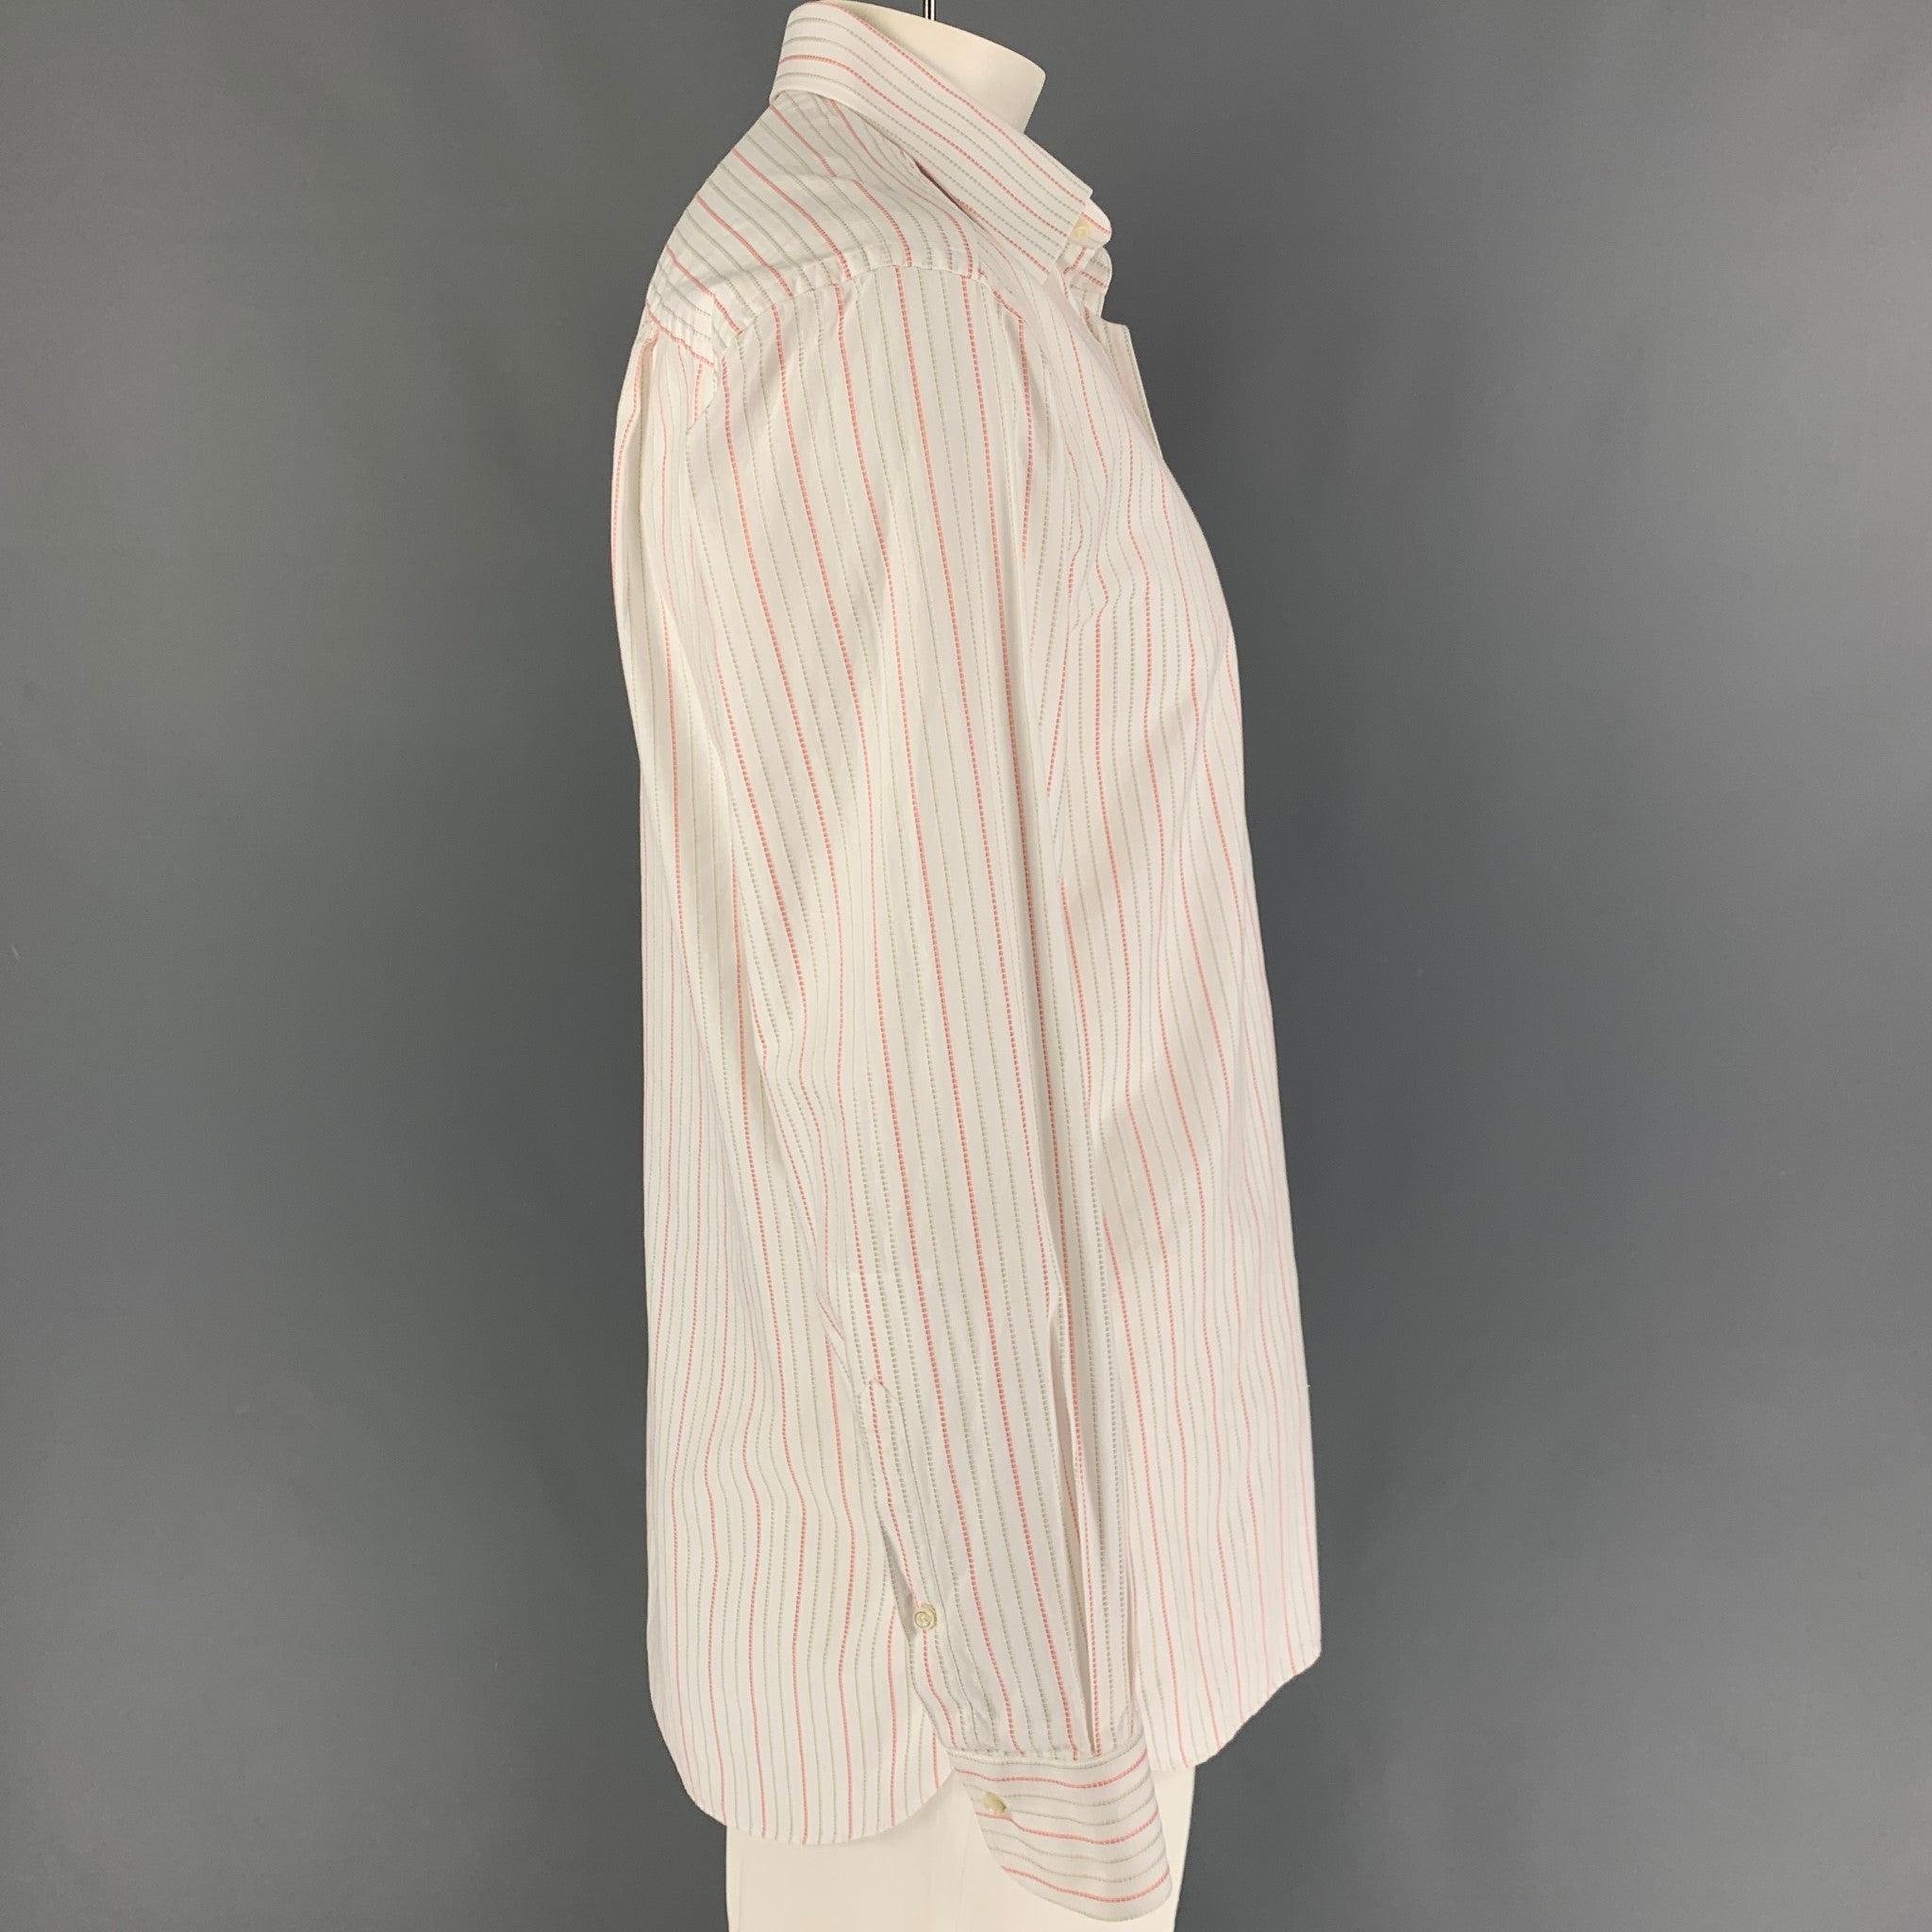 ERMENEGILDO ZEGNA long sleeve shirt comes in a white & orange stripe cotton featuring a spread collar, patch pocket, and a button up closure.
Very Good
Pre-Owned Condition. 

Marked:   42/16.5 

Measurements: 
 
Shoulder: 20 inches  Chest: 46 inches